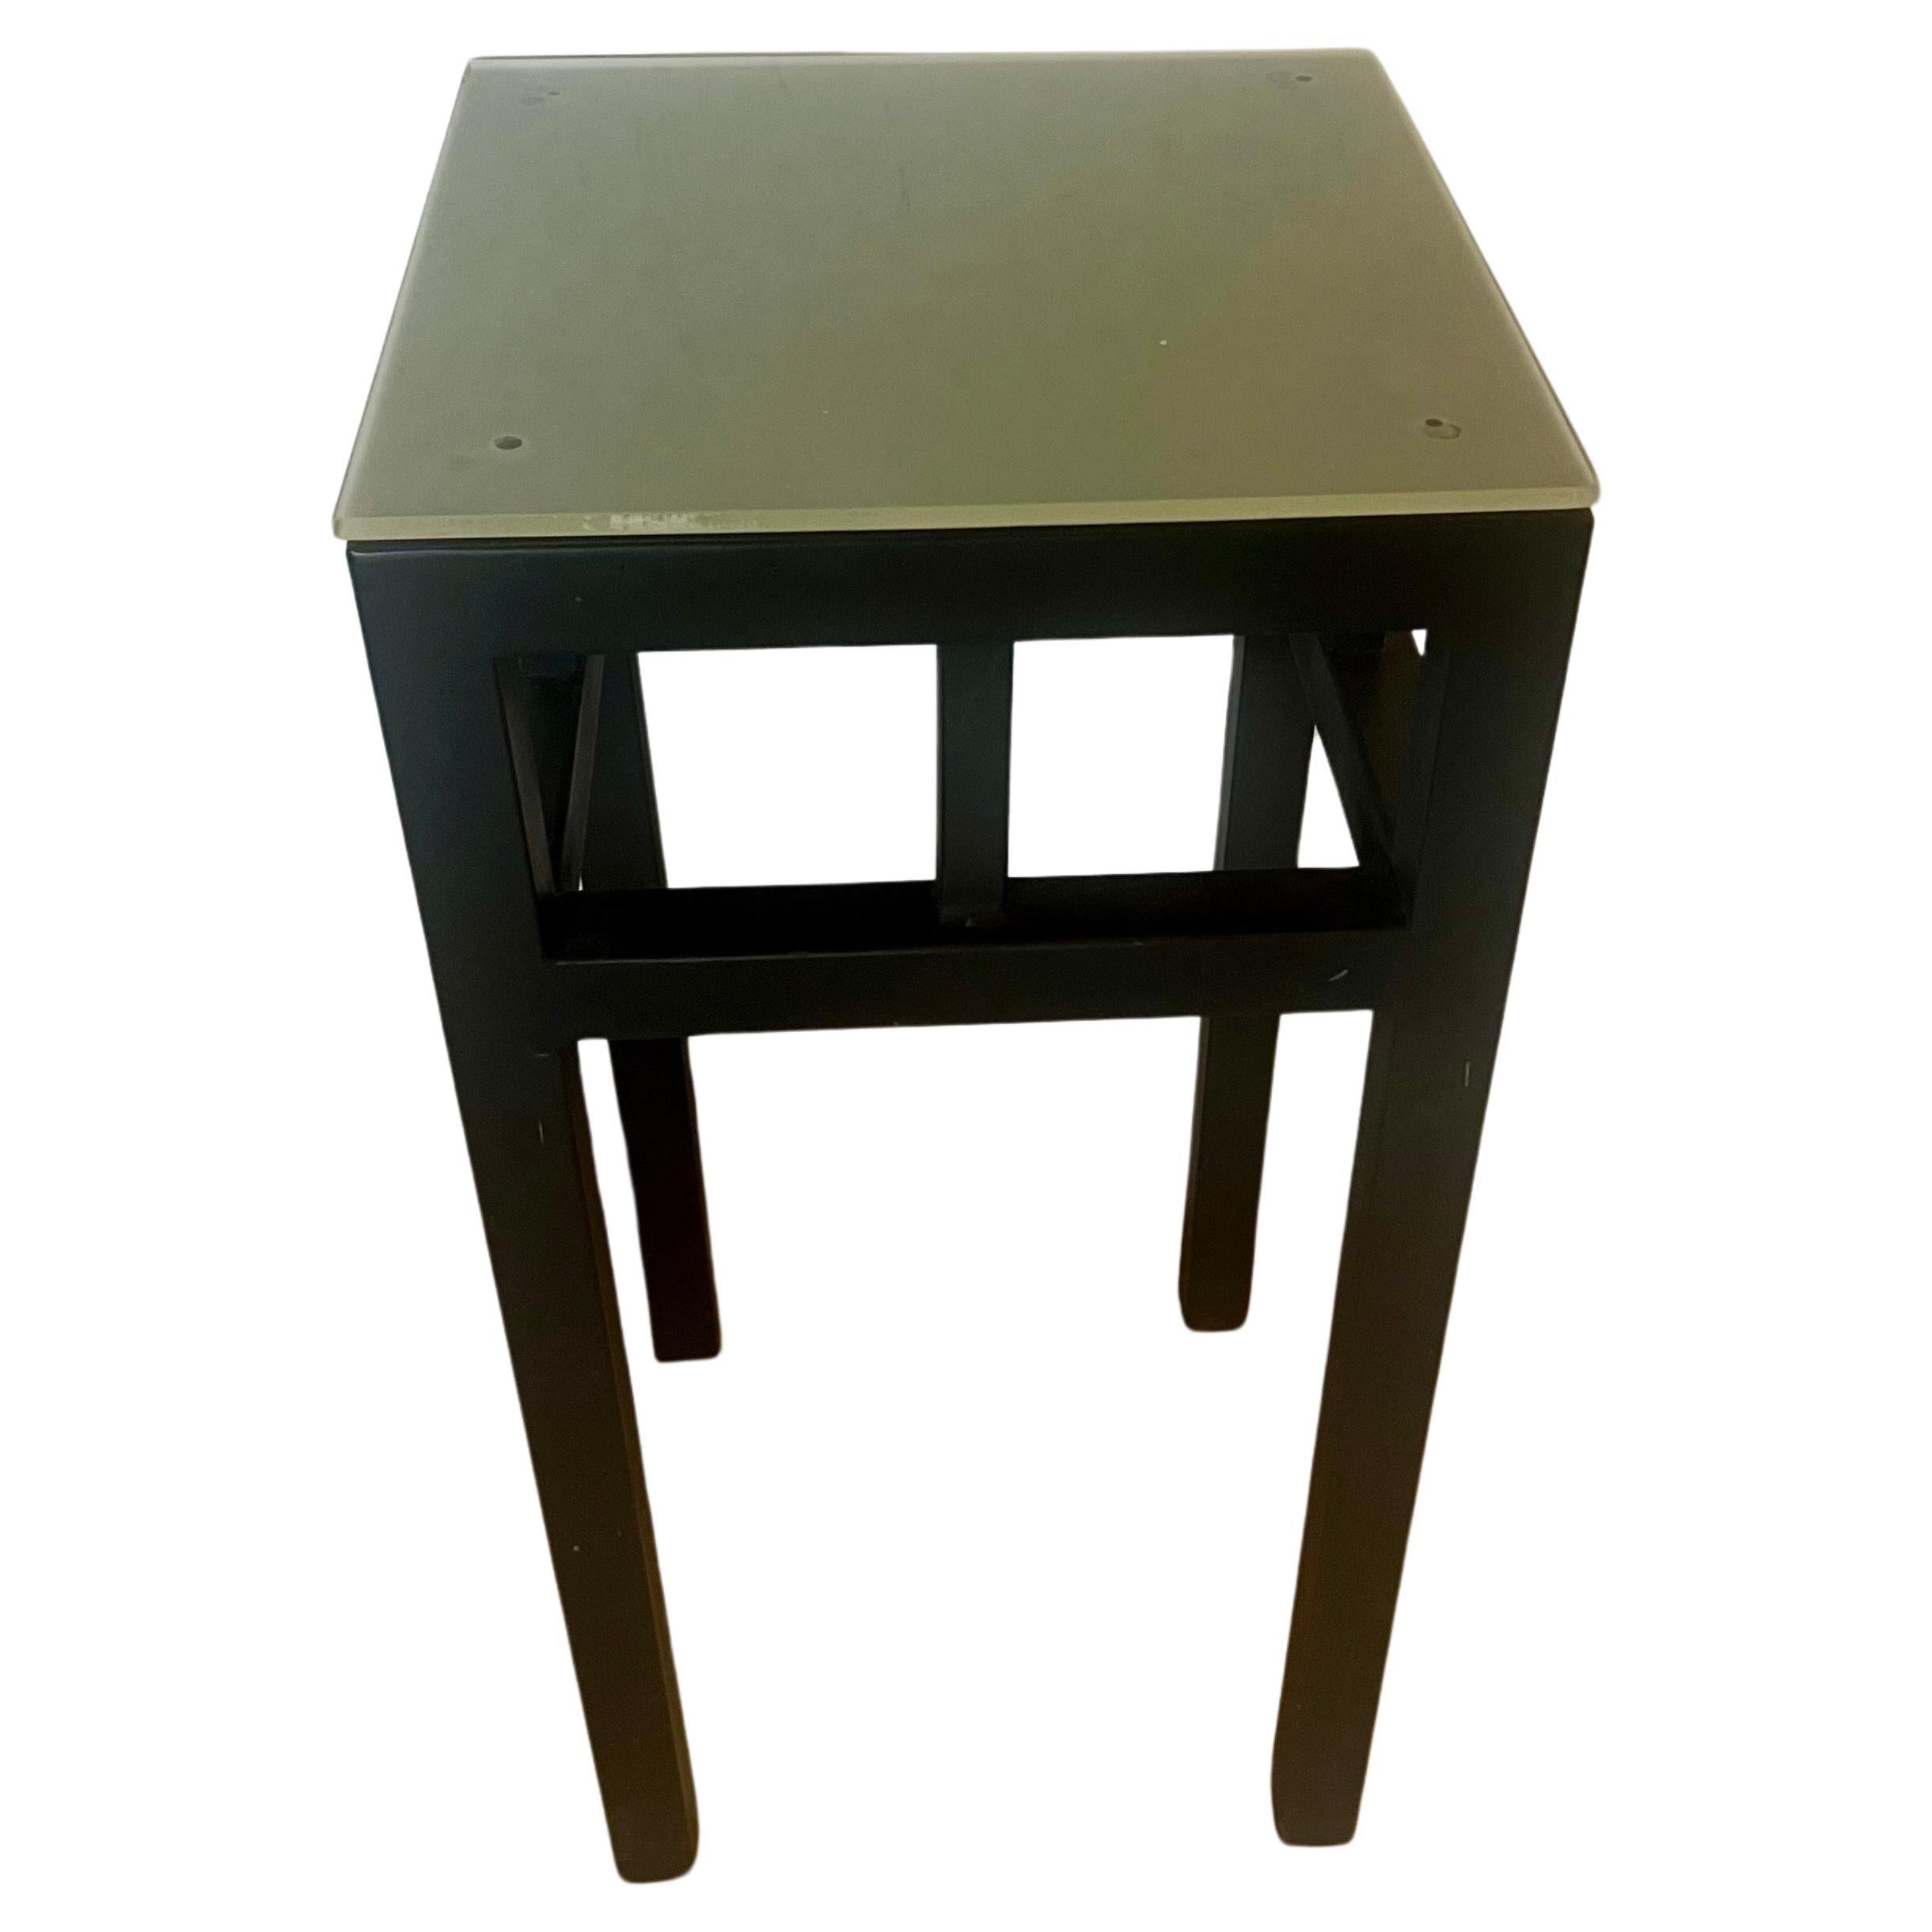 Pair of Postmodern Enameled Steel & Frosted Glass Top Small Tall Tables In Excellent Condition For Sale In San Diego, CA